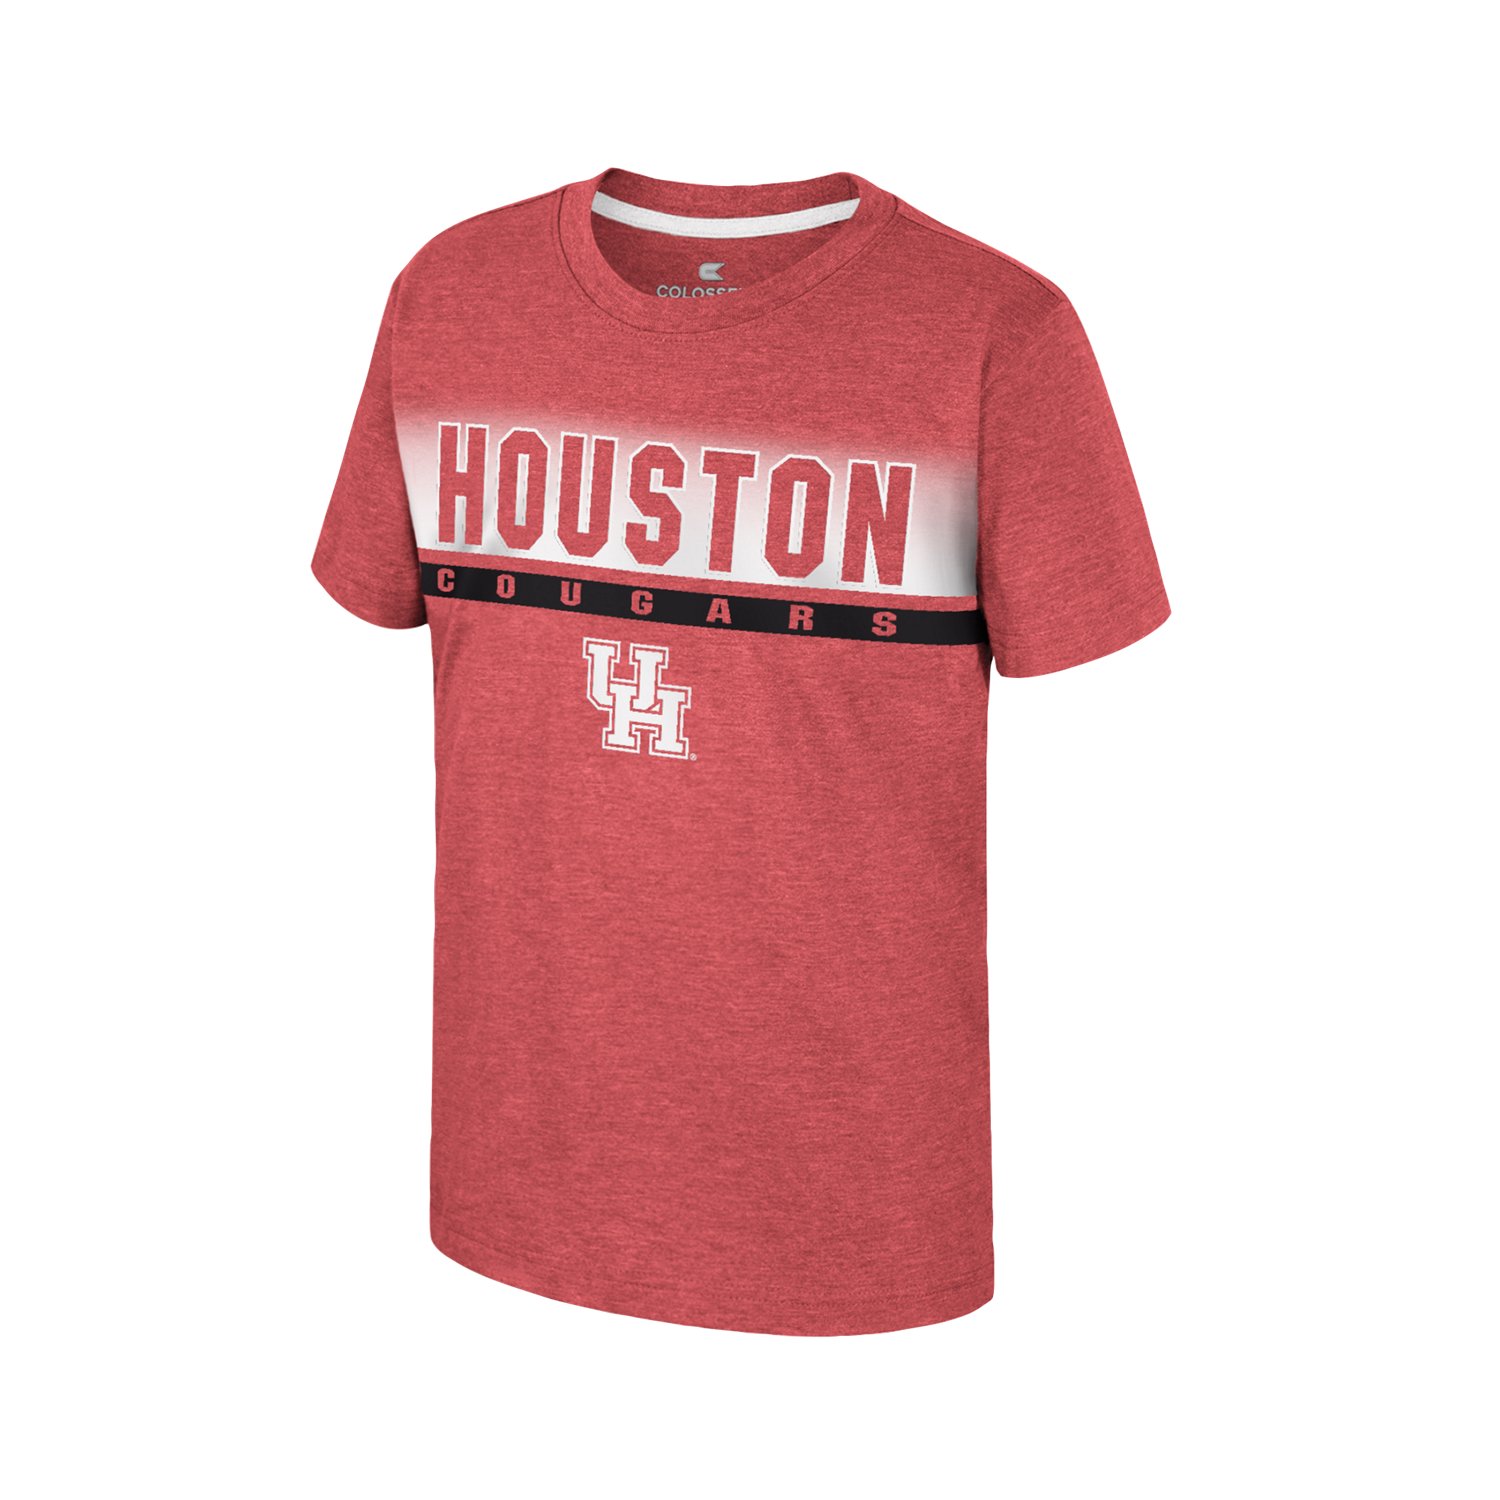 Colosseum Men's Houston Cougars Red Football Jersey